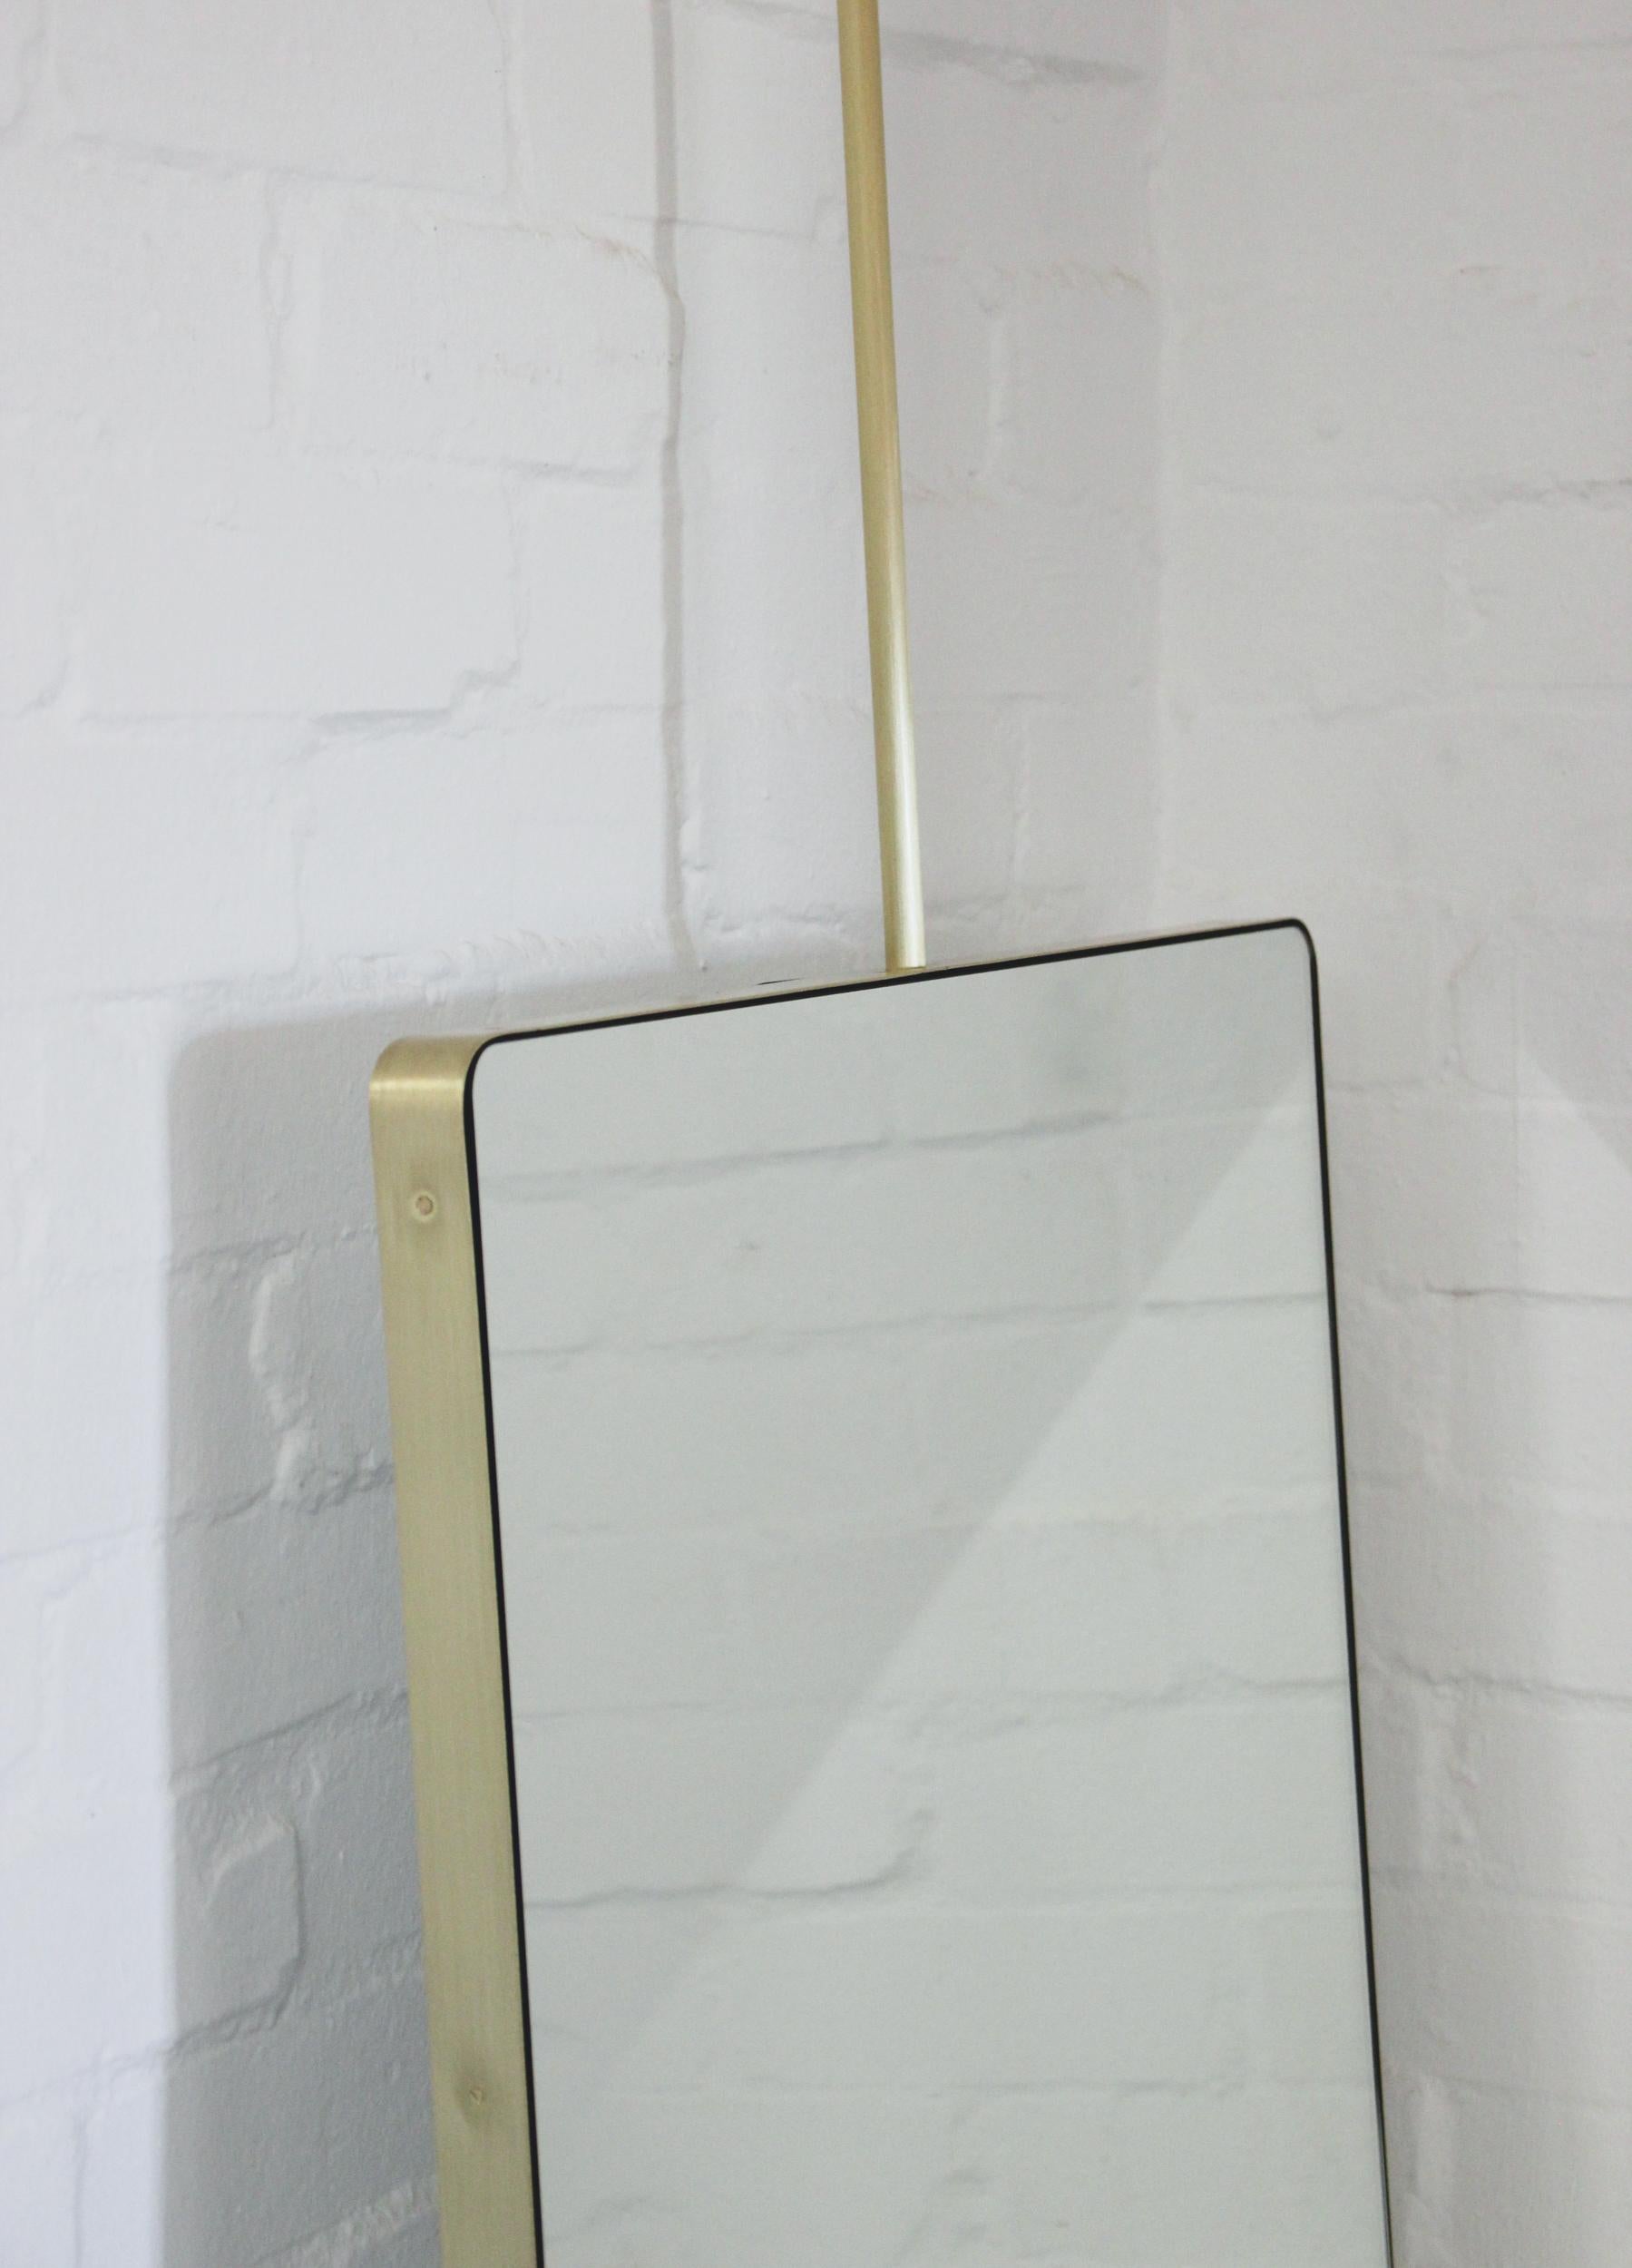 
The images in this personal entry illustrate a standard size of the suspended Quadris mirror with a brushed brass frame. All specifications for this particular entry are as detailed in the presentation already provided and approved.

The price in